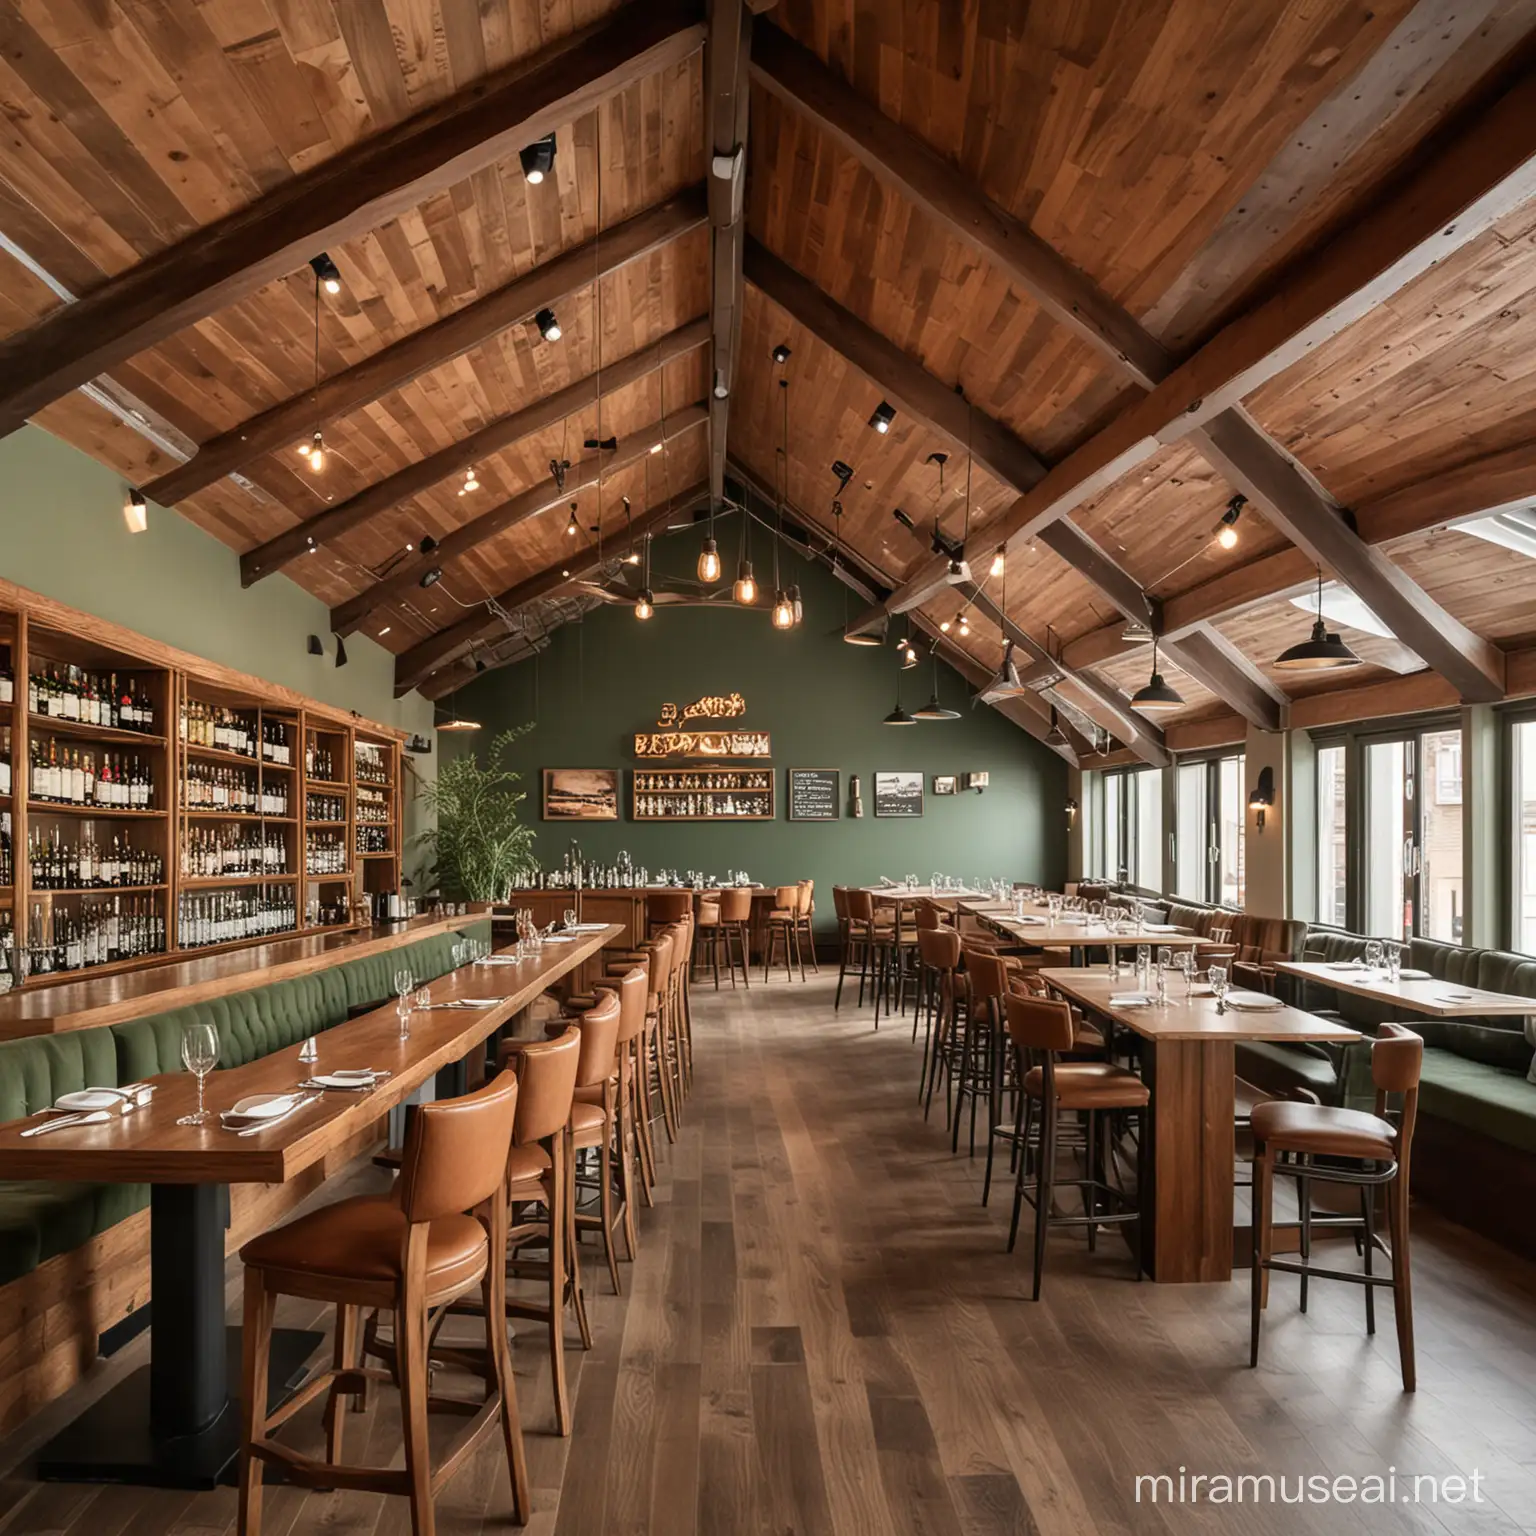 Rustic Attic Restaurant with Wooden Ceiling and Khaki Green Interior